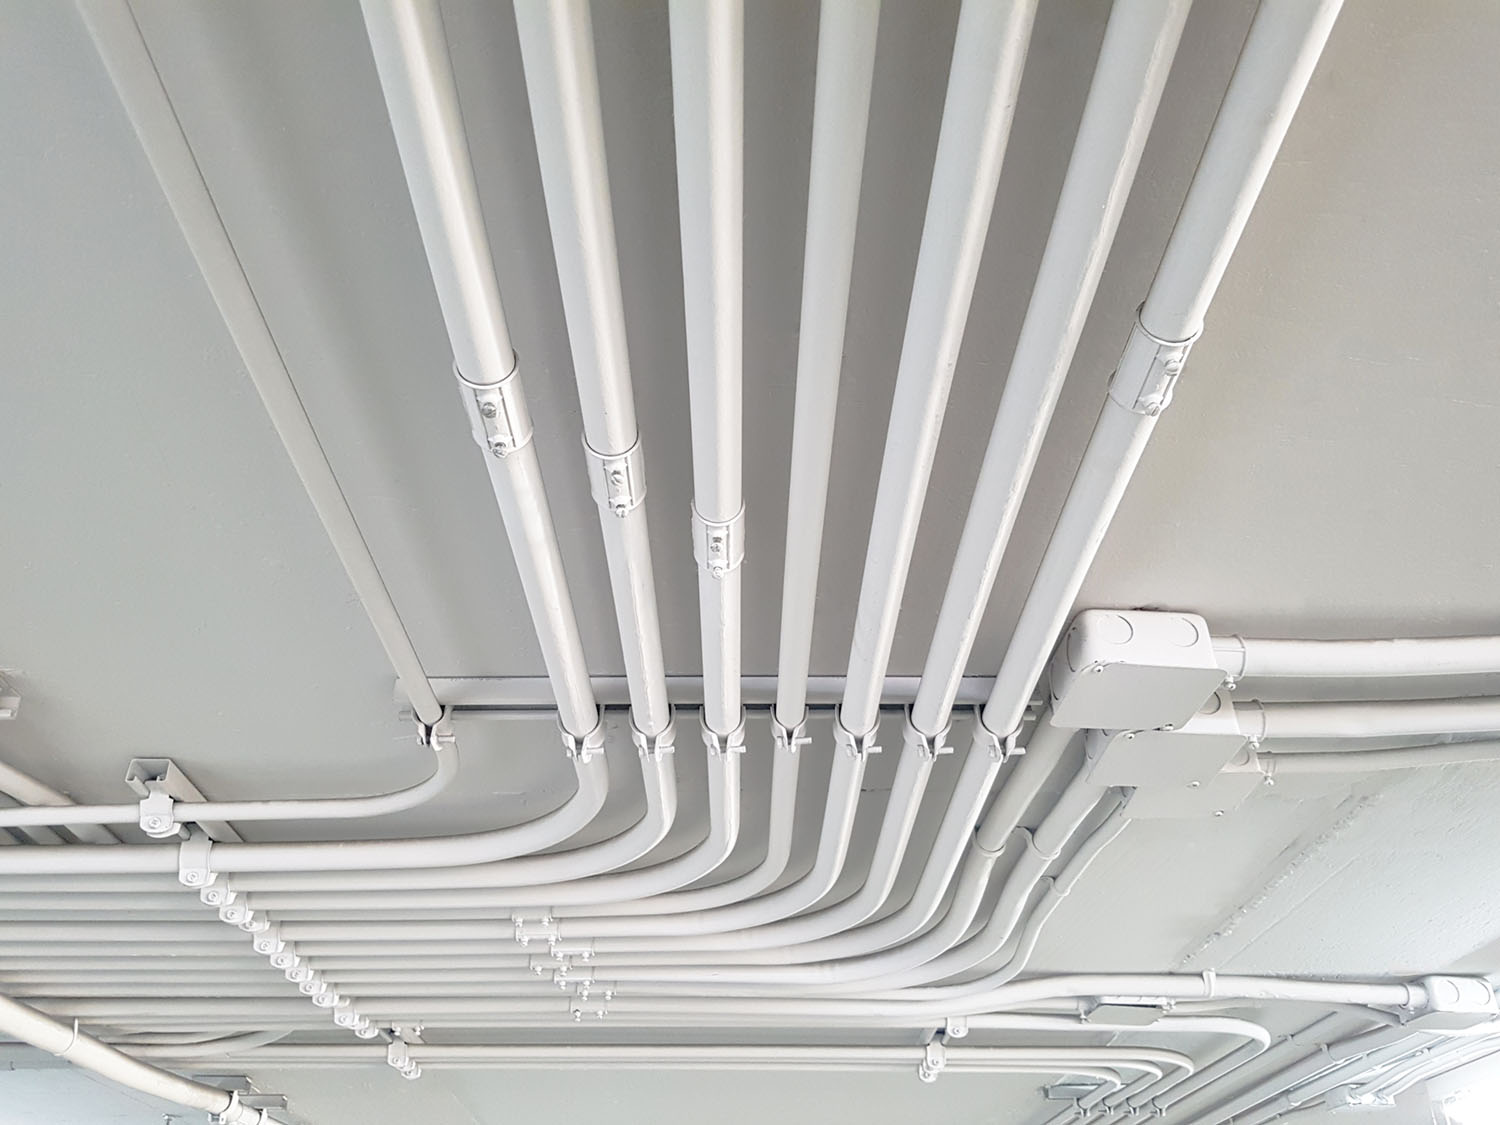 A well-structured white PVC electrical conduit system